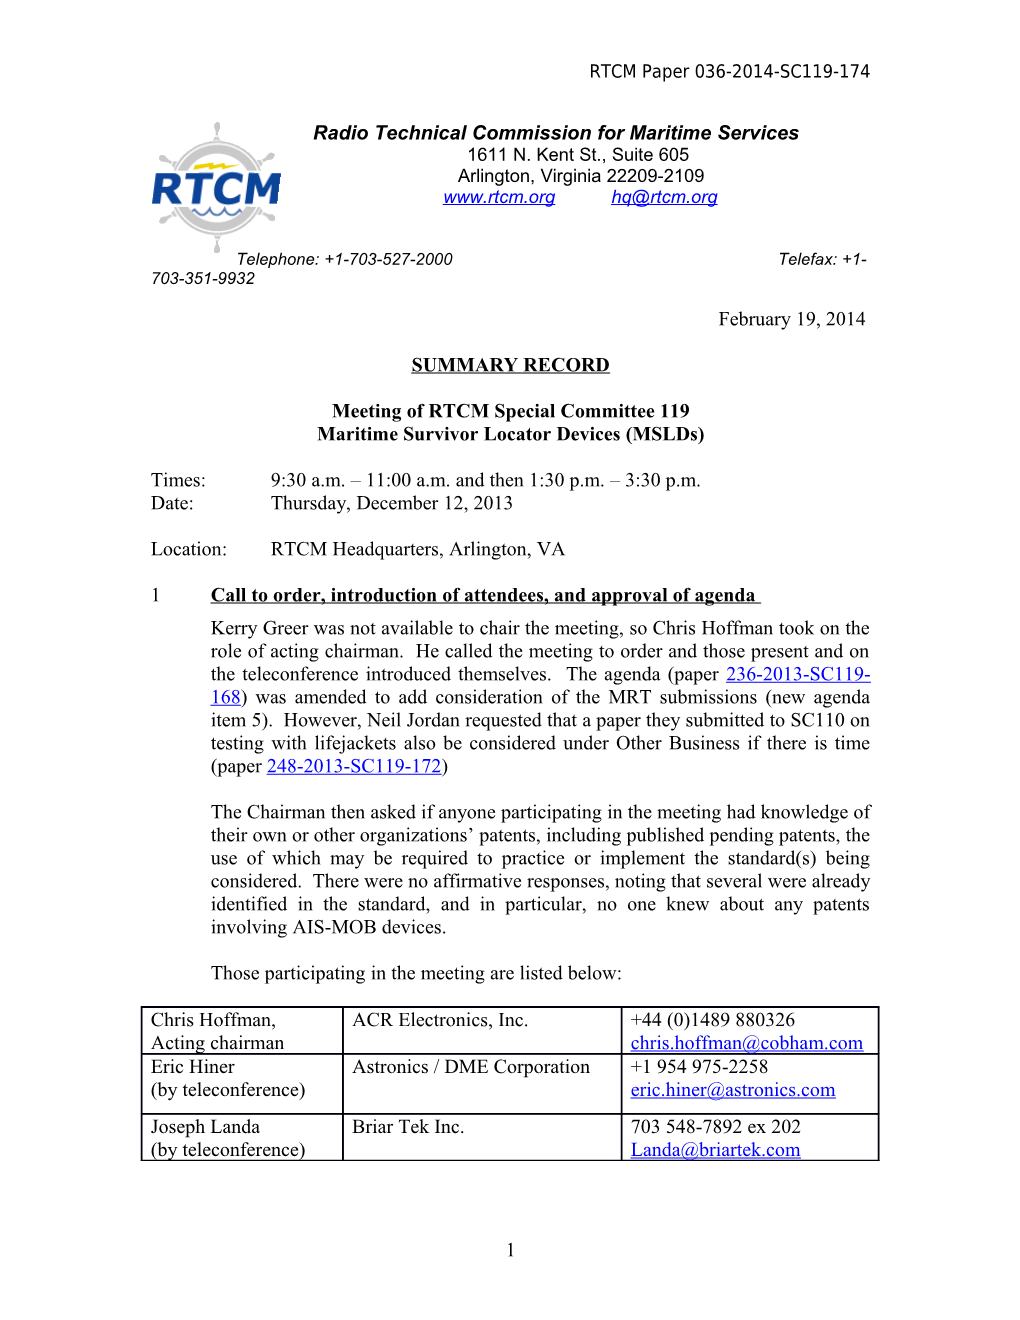 Radio Technical Commission for Maritime Services s1